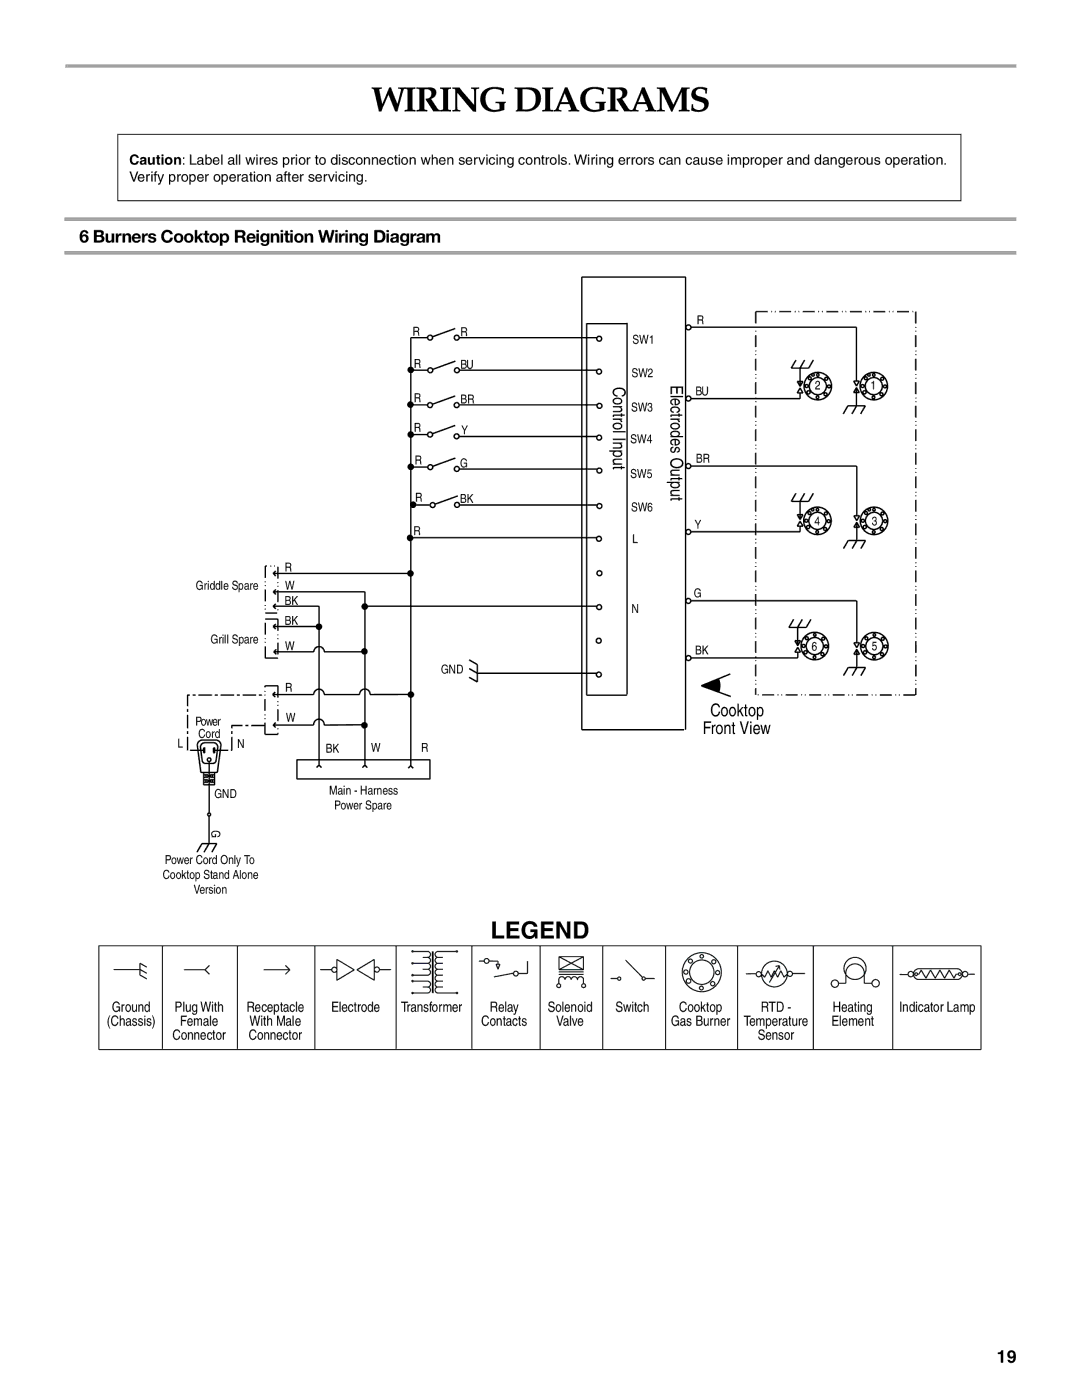 KitchenAid W10271686B installation instructions Wiring Diagrams, Burners Cooktop Reignition Wiring Diagram 